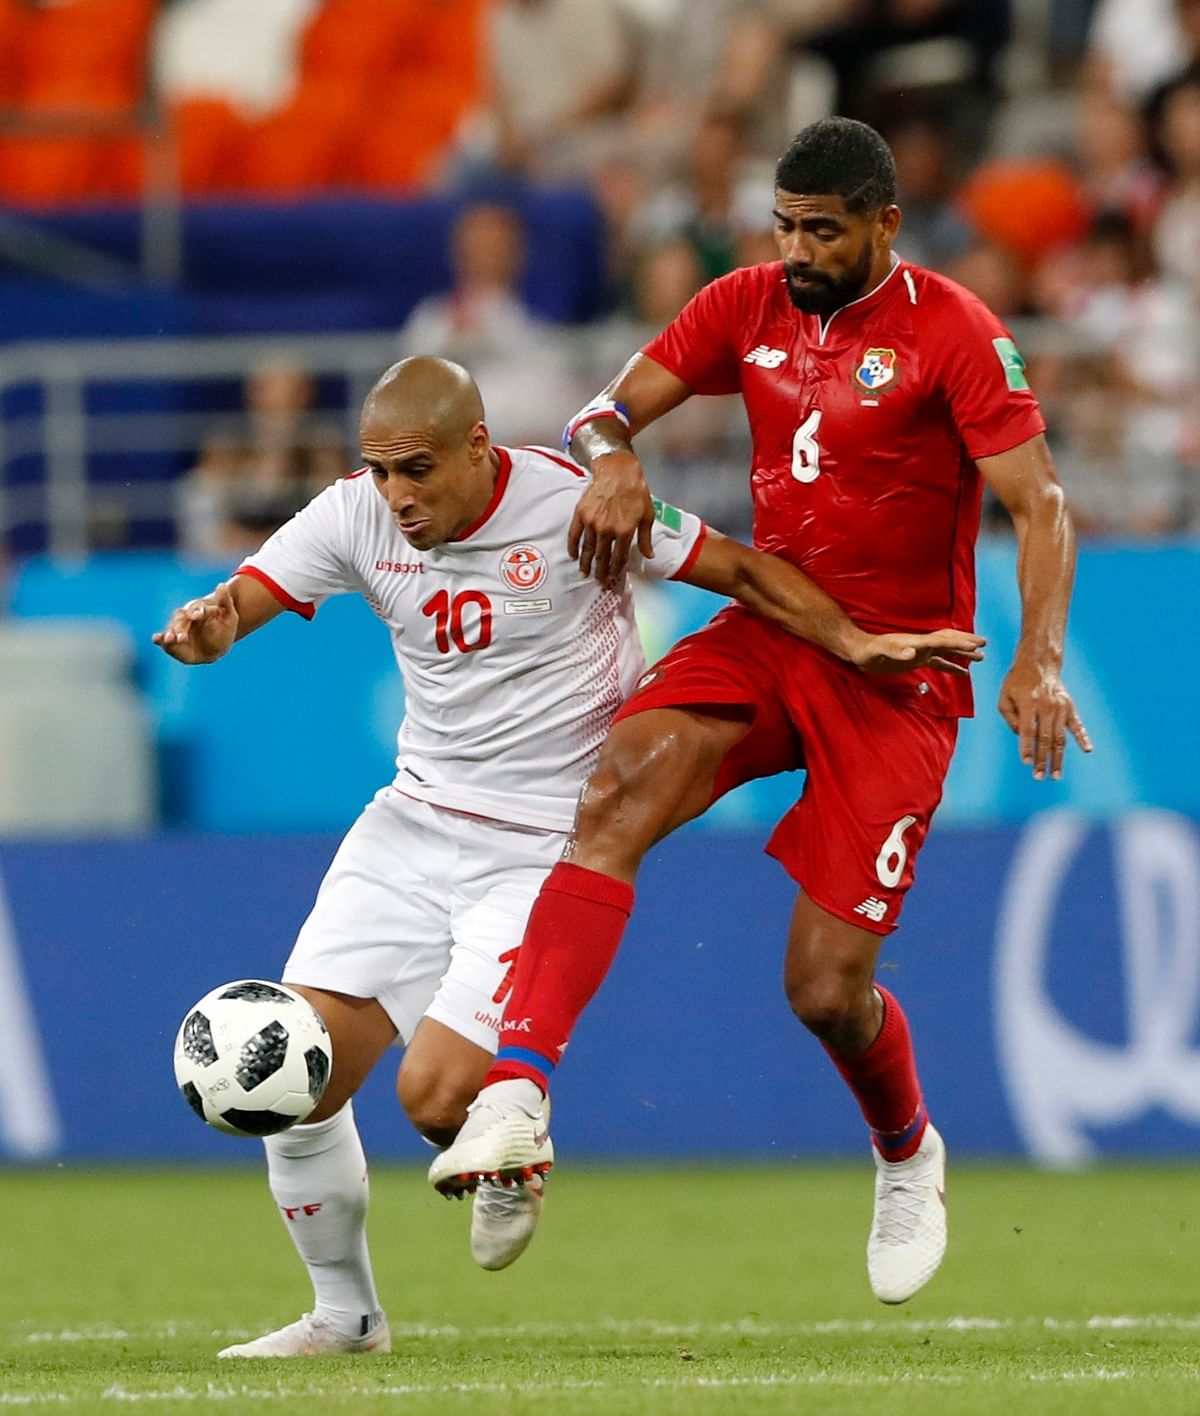 Tunisia beat World Cup debutants Panama 2-1 in their final Group G match on Thursday.